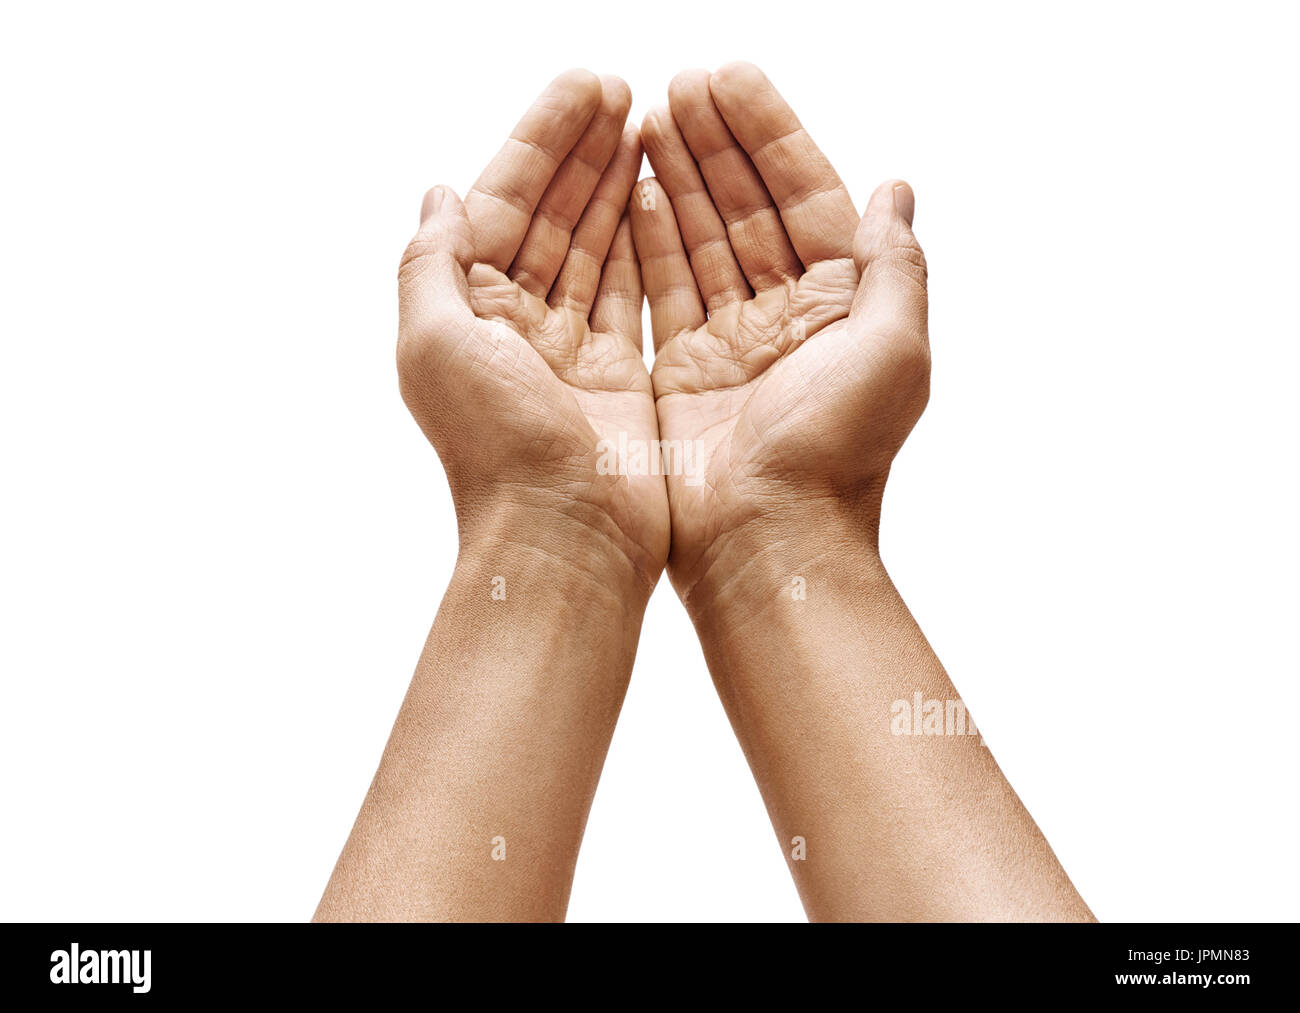 Cupped hands Cut Out Stock Images & Pictures - Alamy